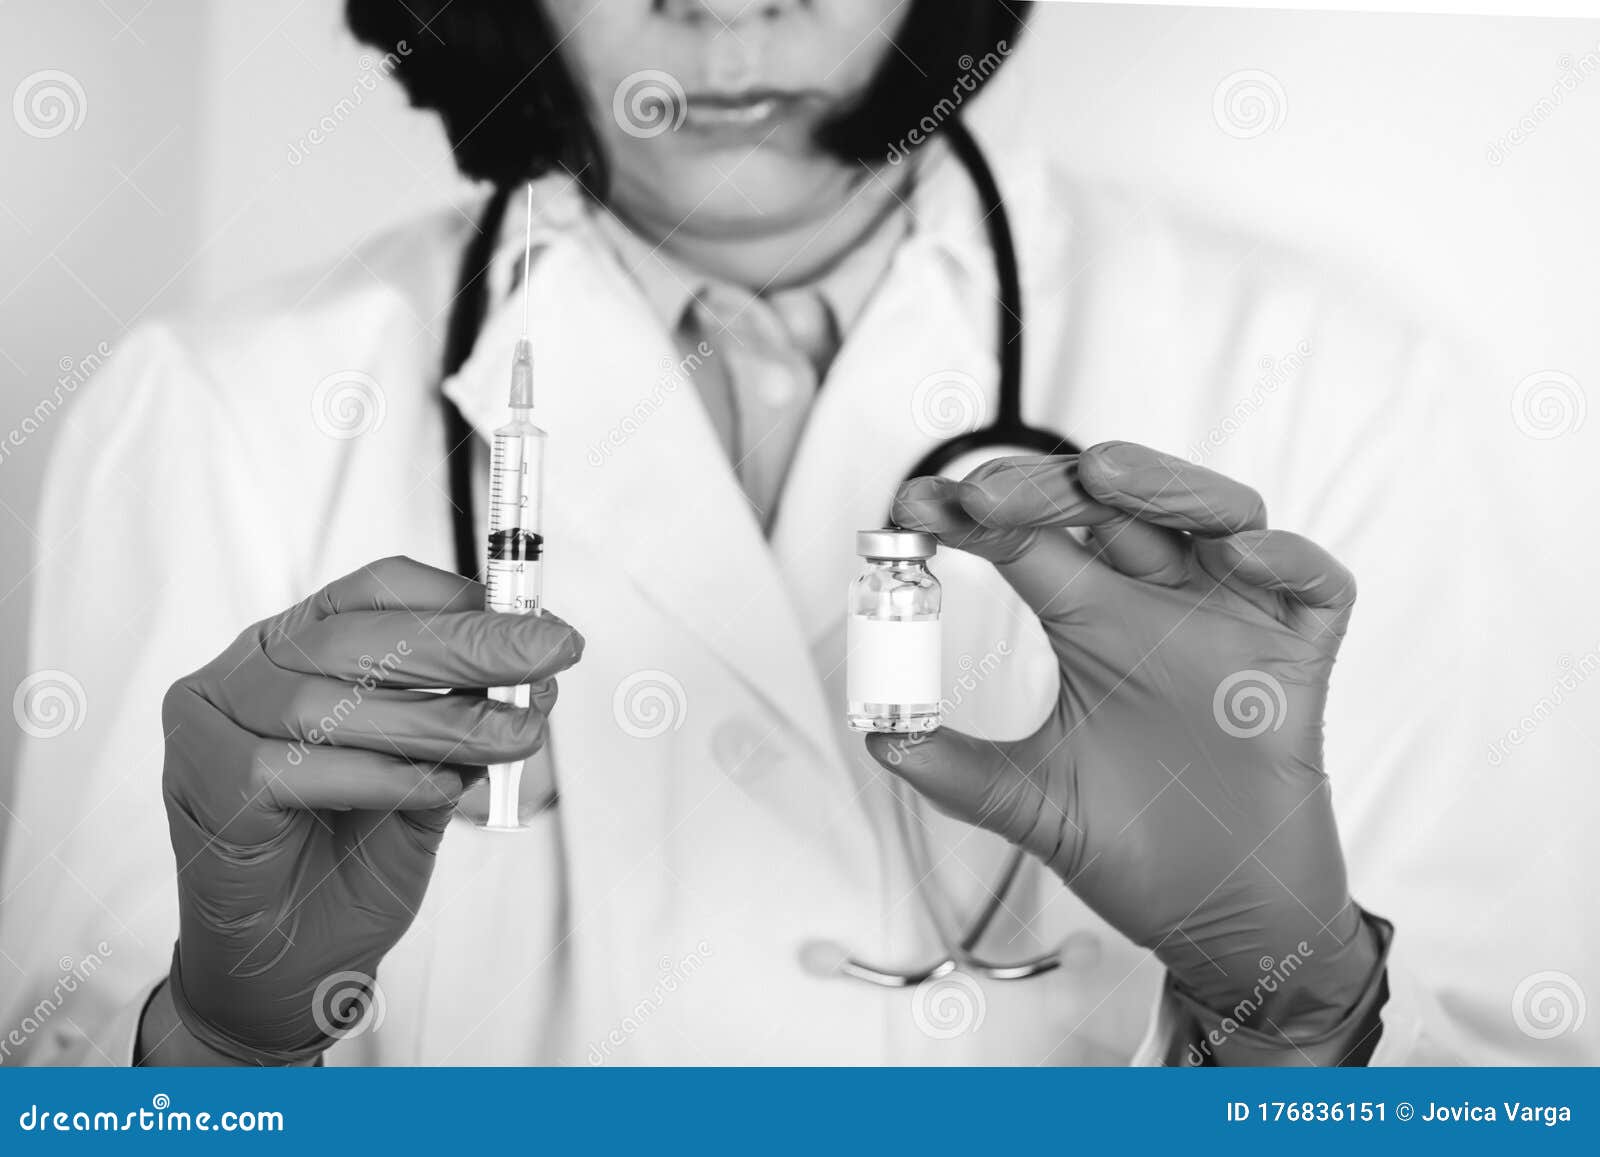 close up of a doctor in white lab coat and sterile gloves holding syringe and medicine in ampoule